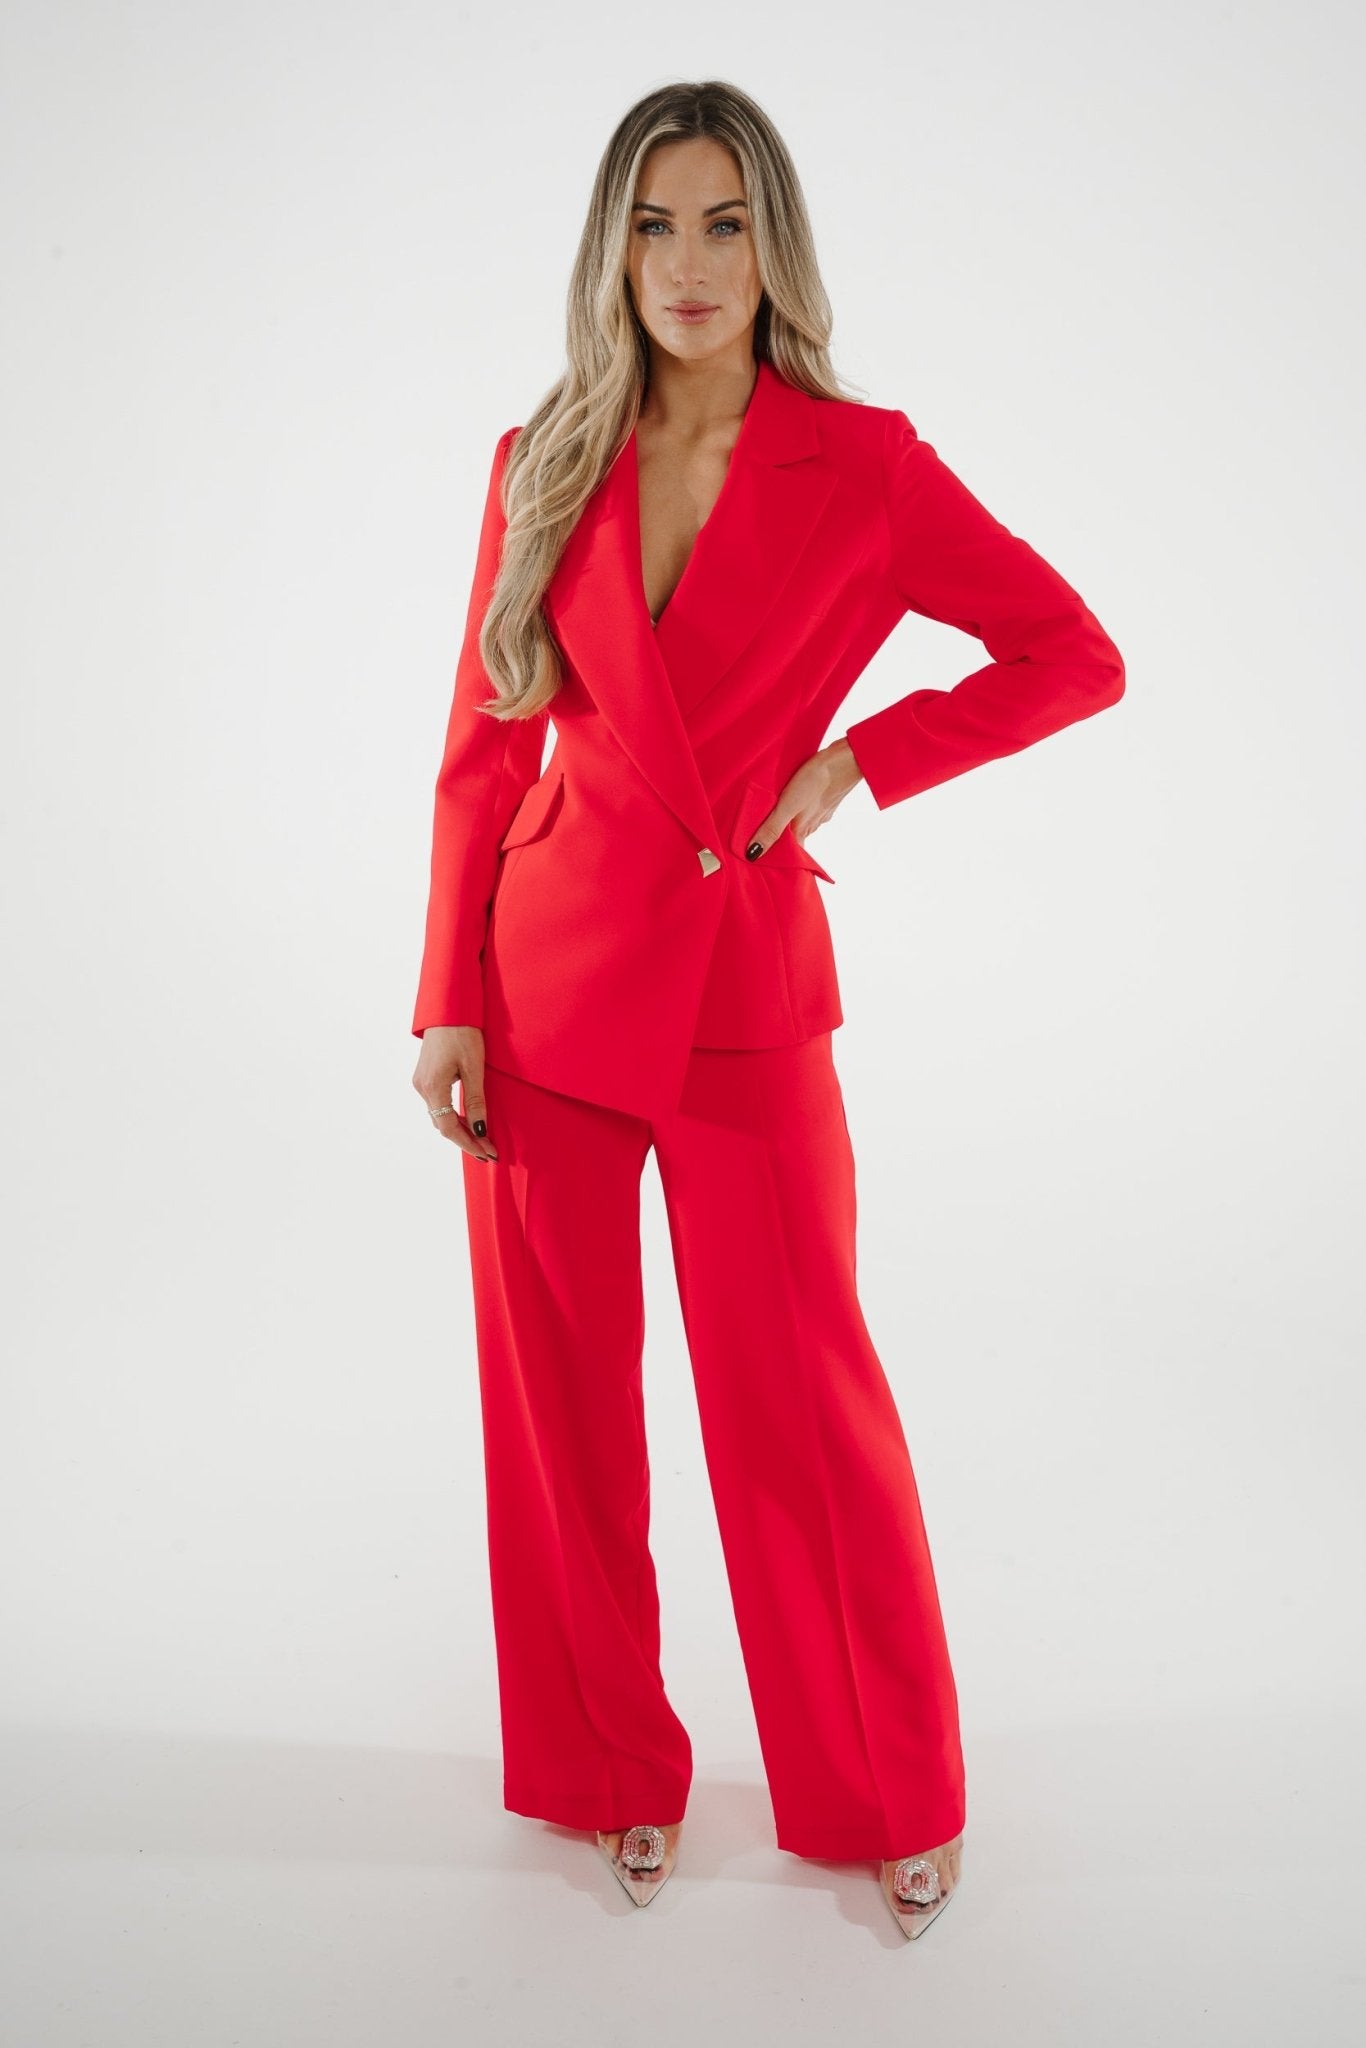 Kayla Two Piece Suit In Coral Red - The Walk in Wardrobe